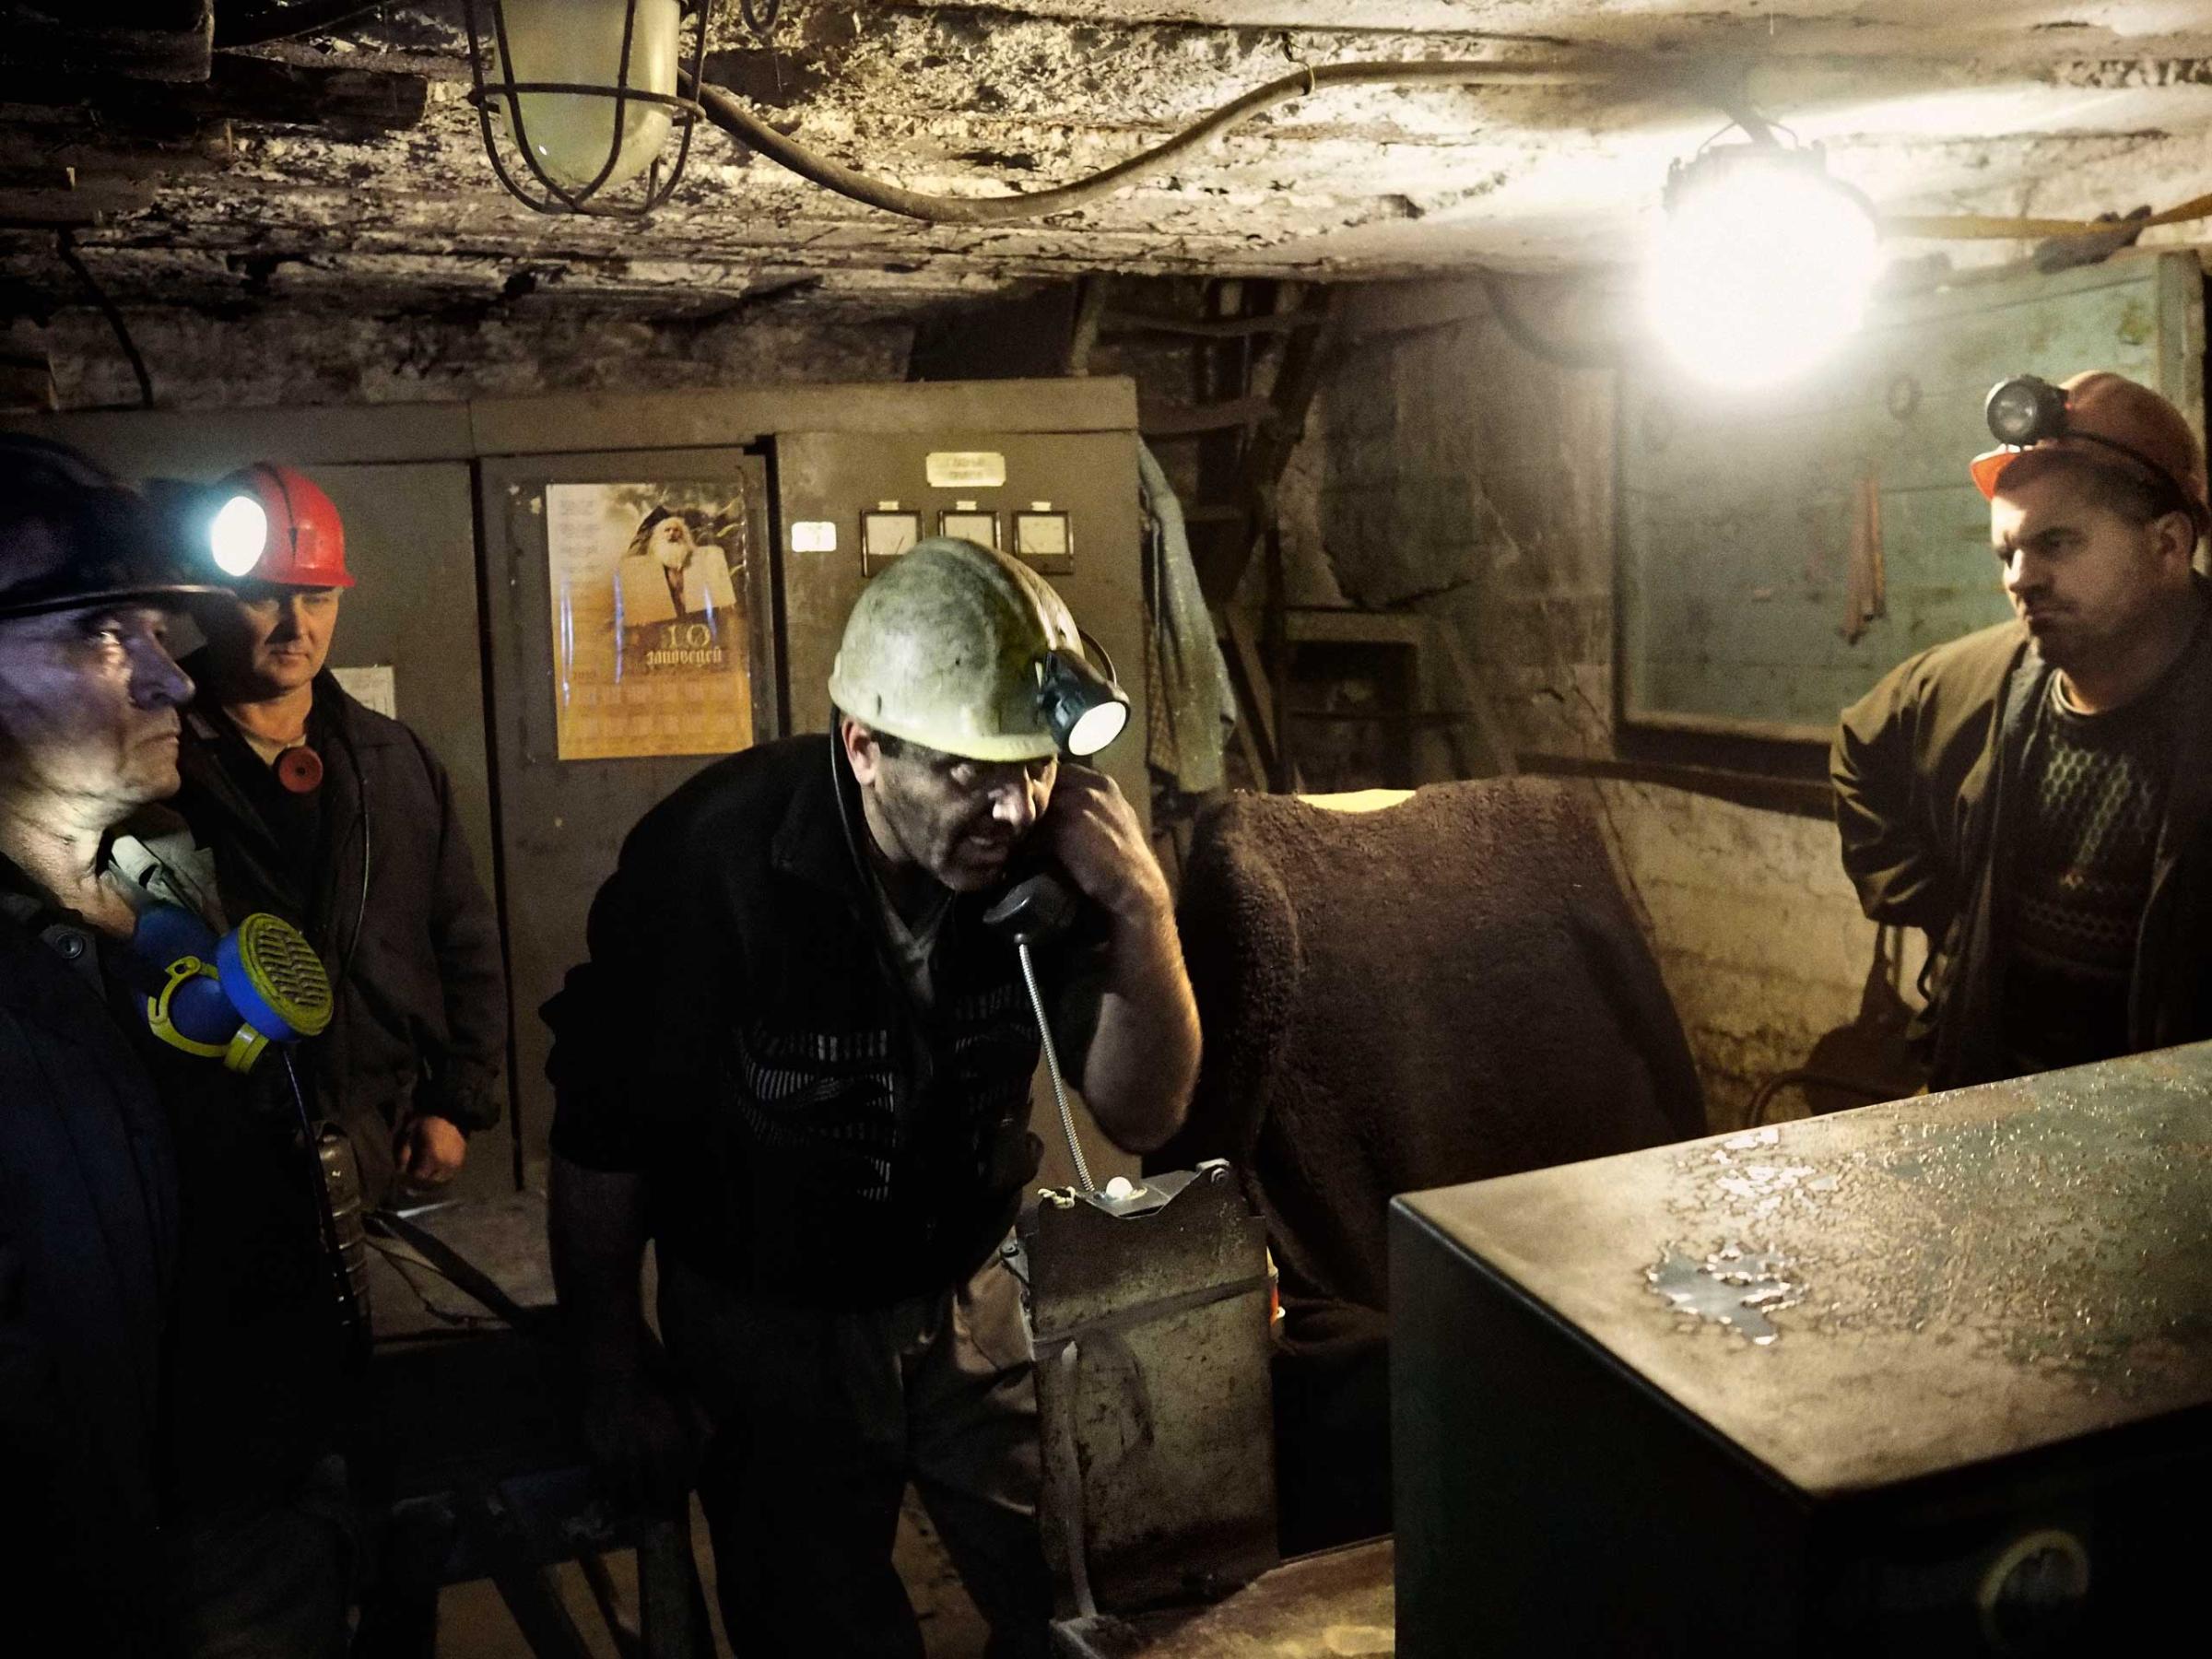 Donbass coal miners